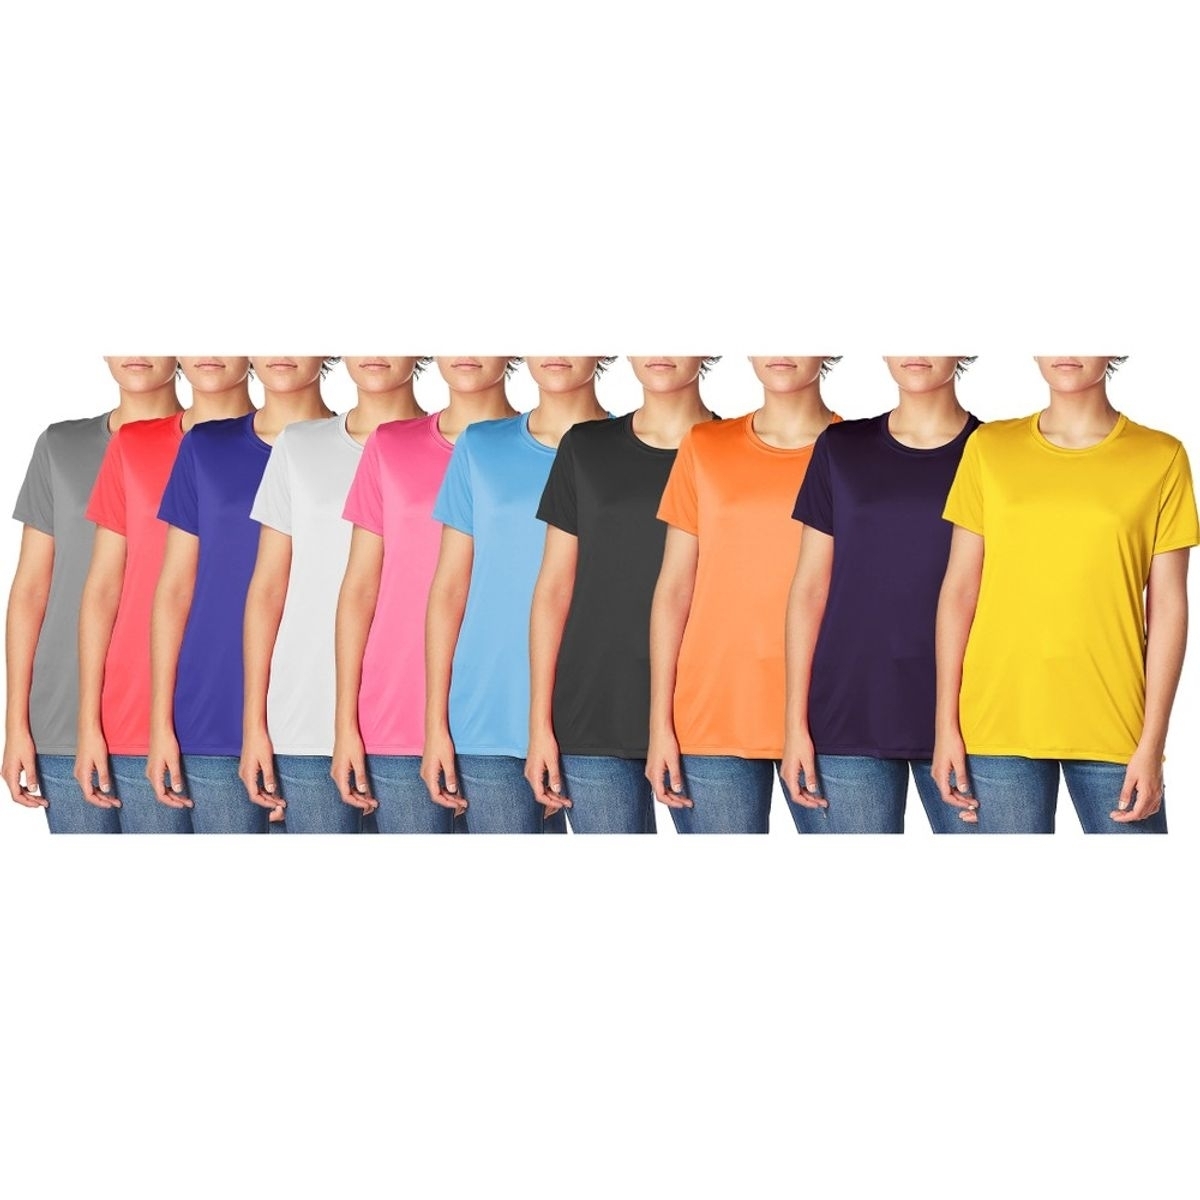 4-Pack: Women's Cool Dri-FIt Moisture Wicking Sim-Fit Long Sleeve Crew Neck T-Shirts - X-large